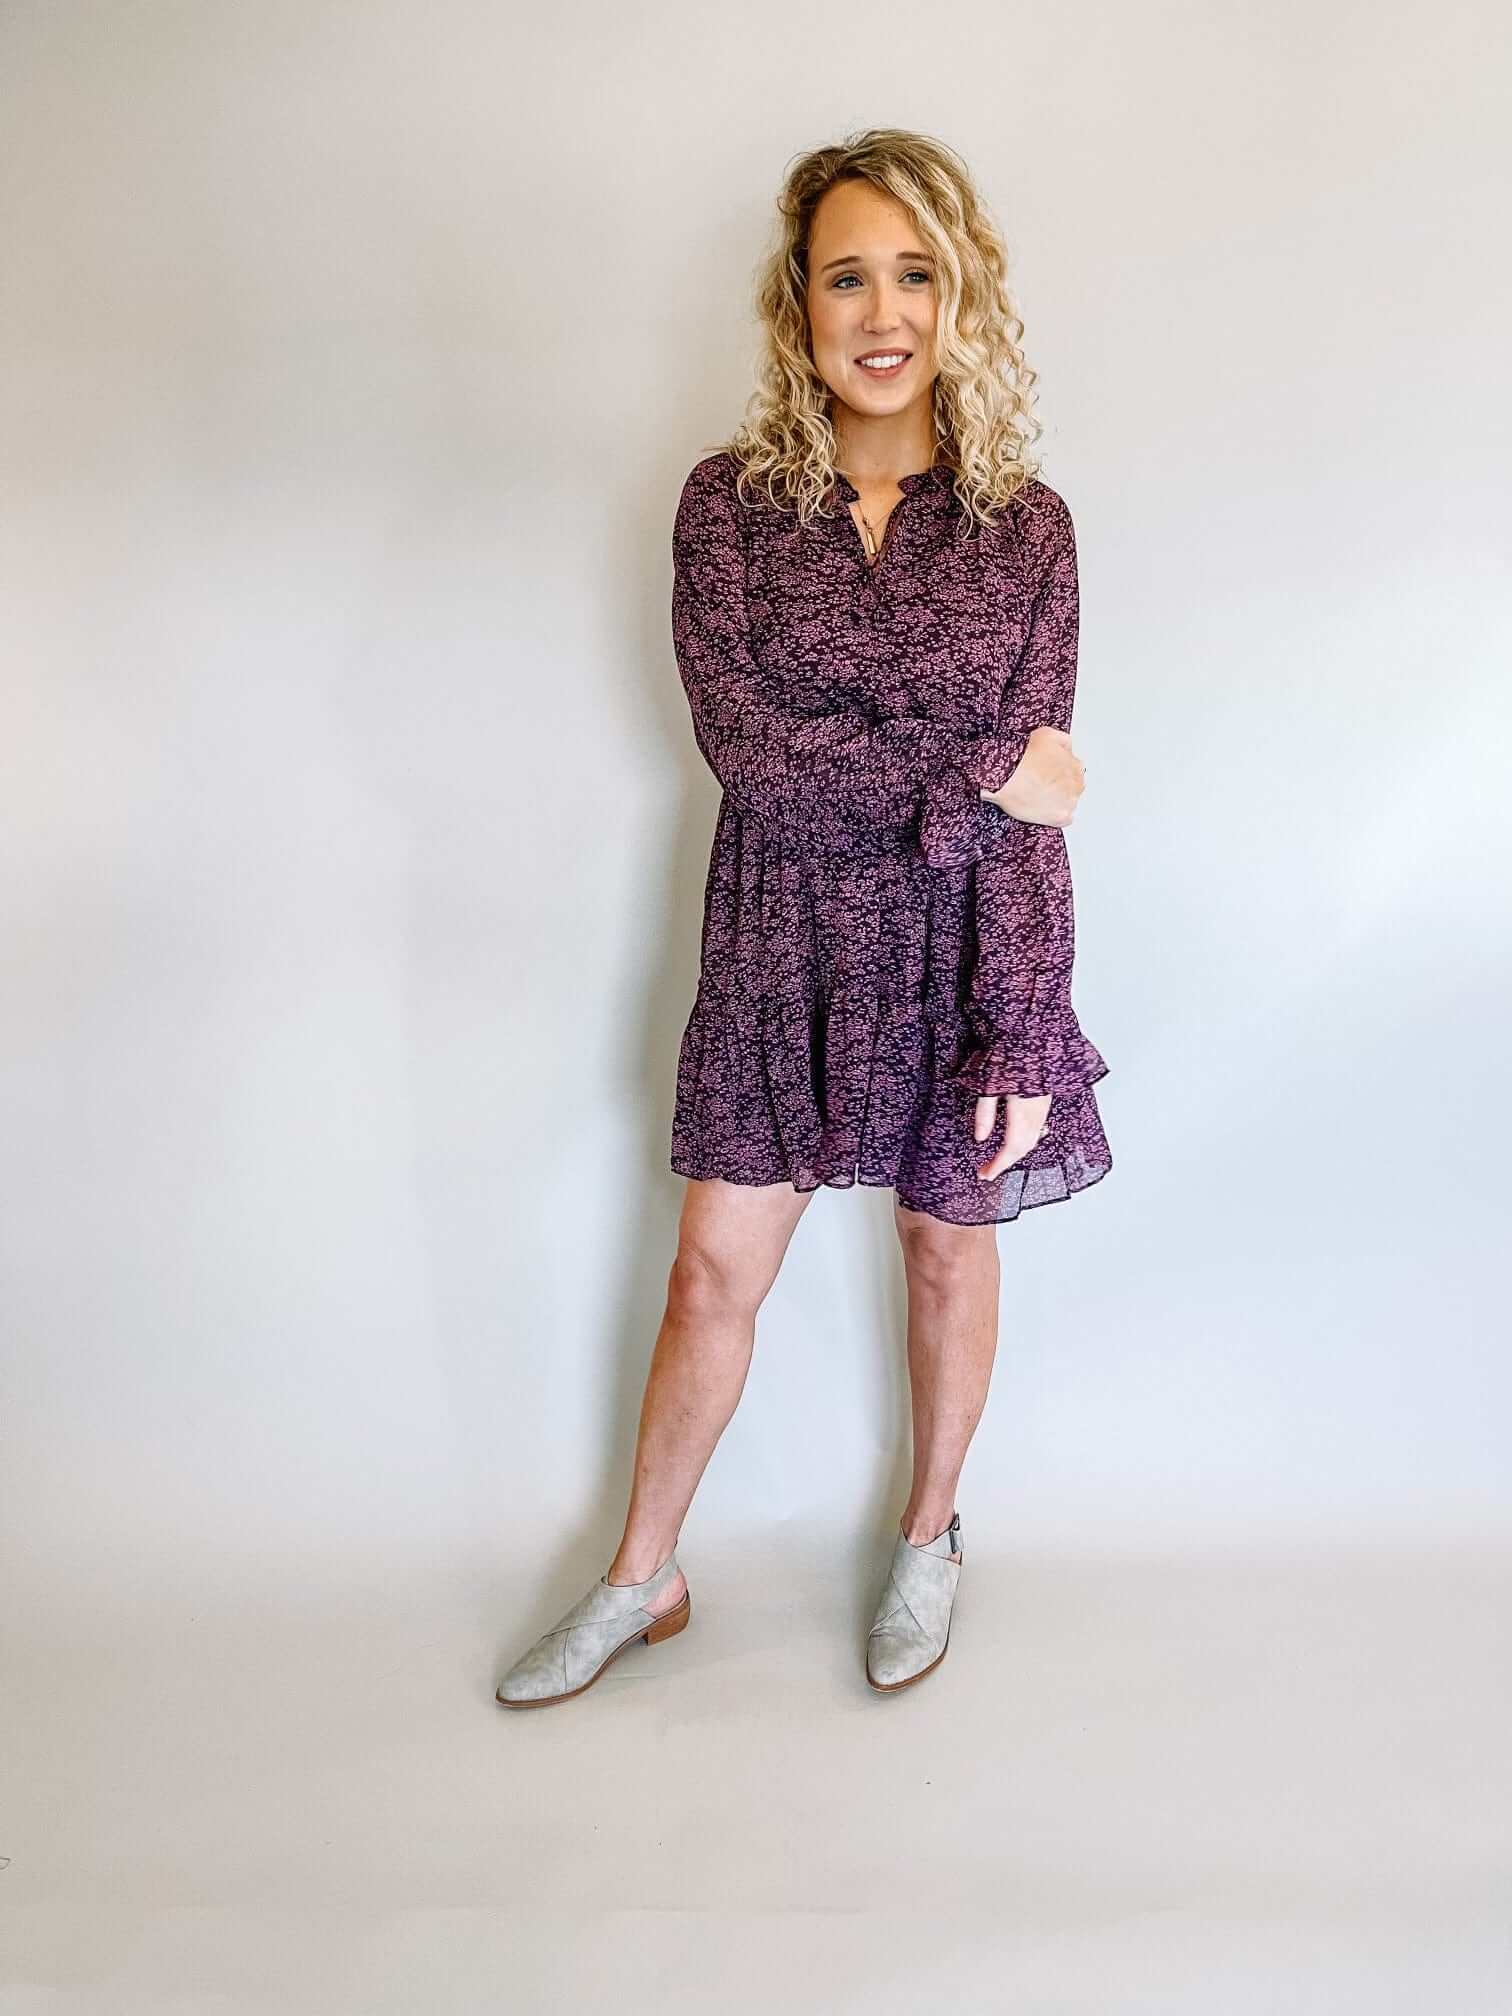 swing mini dress with three tiers in egg plant color with mauve floral print ruffled collar, tie detail on neck long flounce sleeves fully Lined